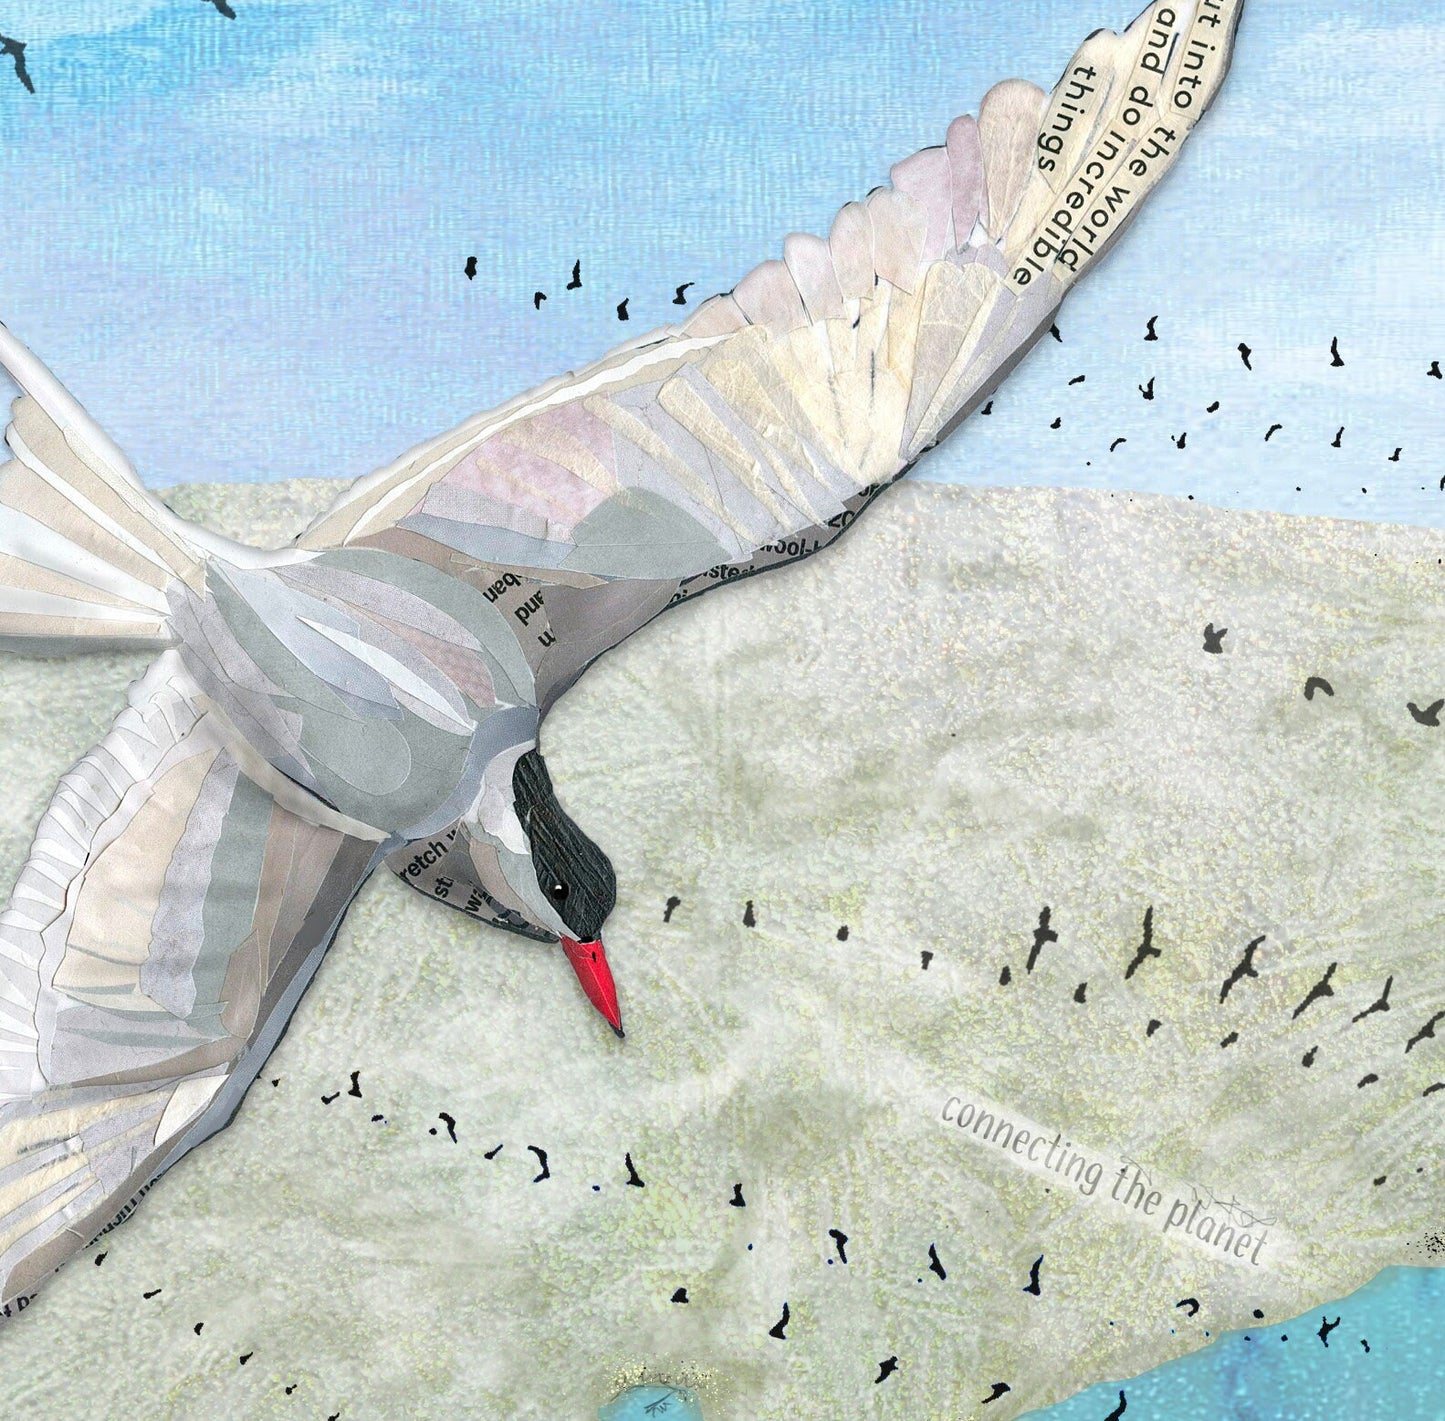 Greeting Card of mixed media collage of Arctic Terns flying over the planet along with other birds migrating around the globe- Blank Inside